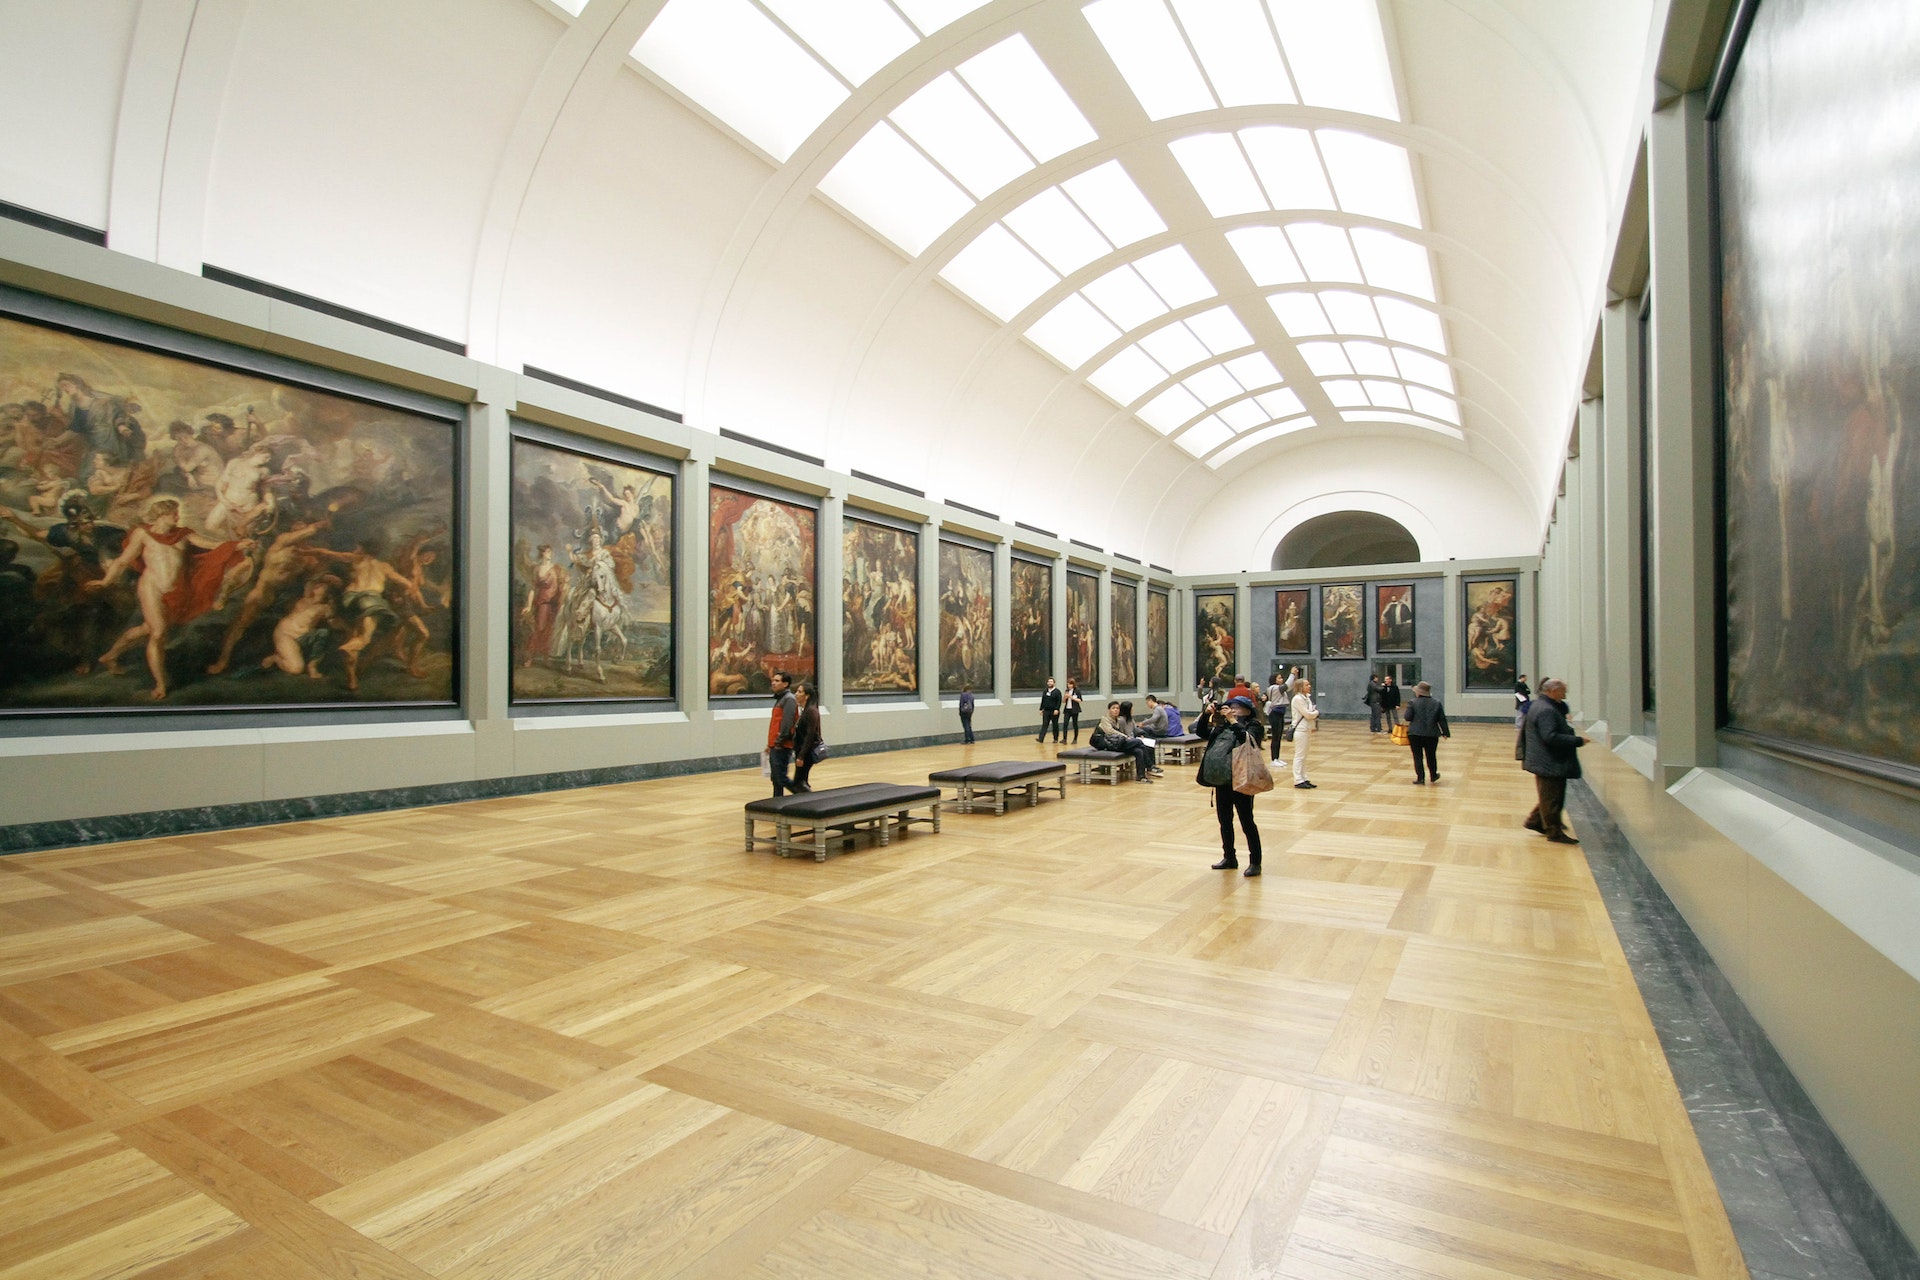 Gallery of images in a museum